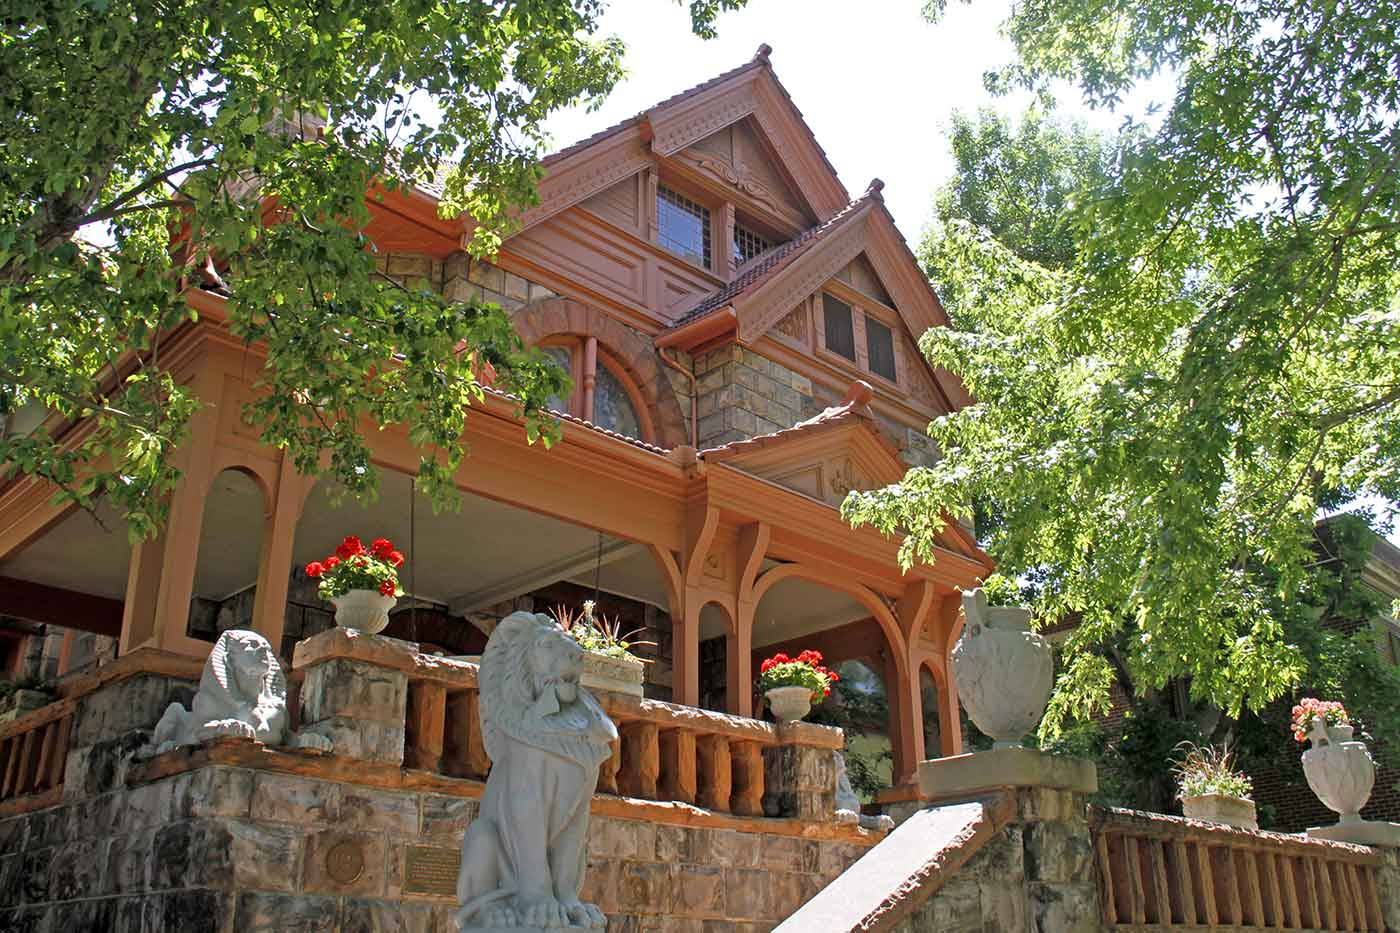 Molly Brown House